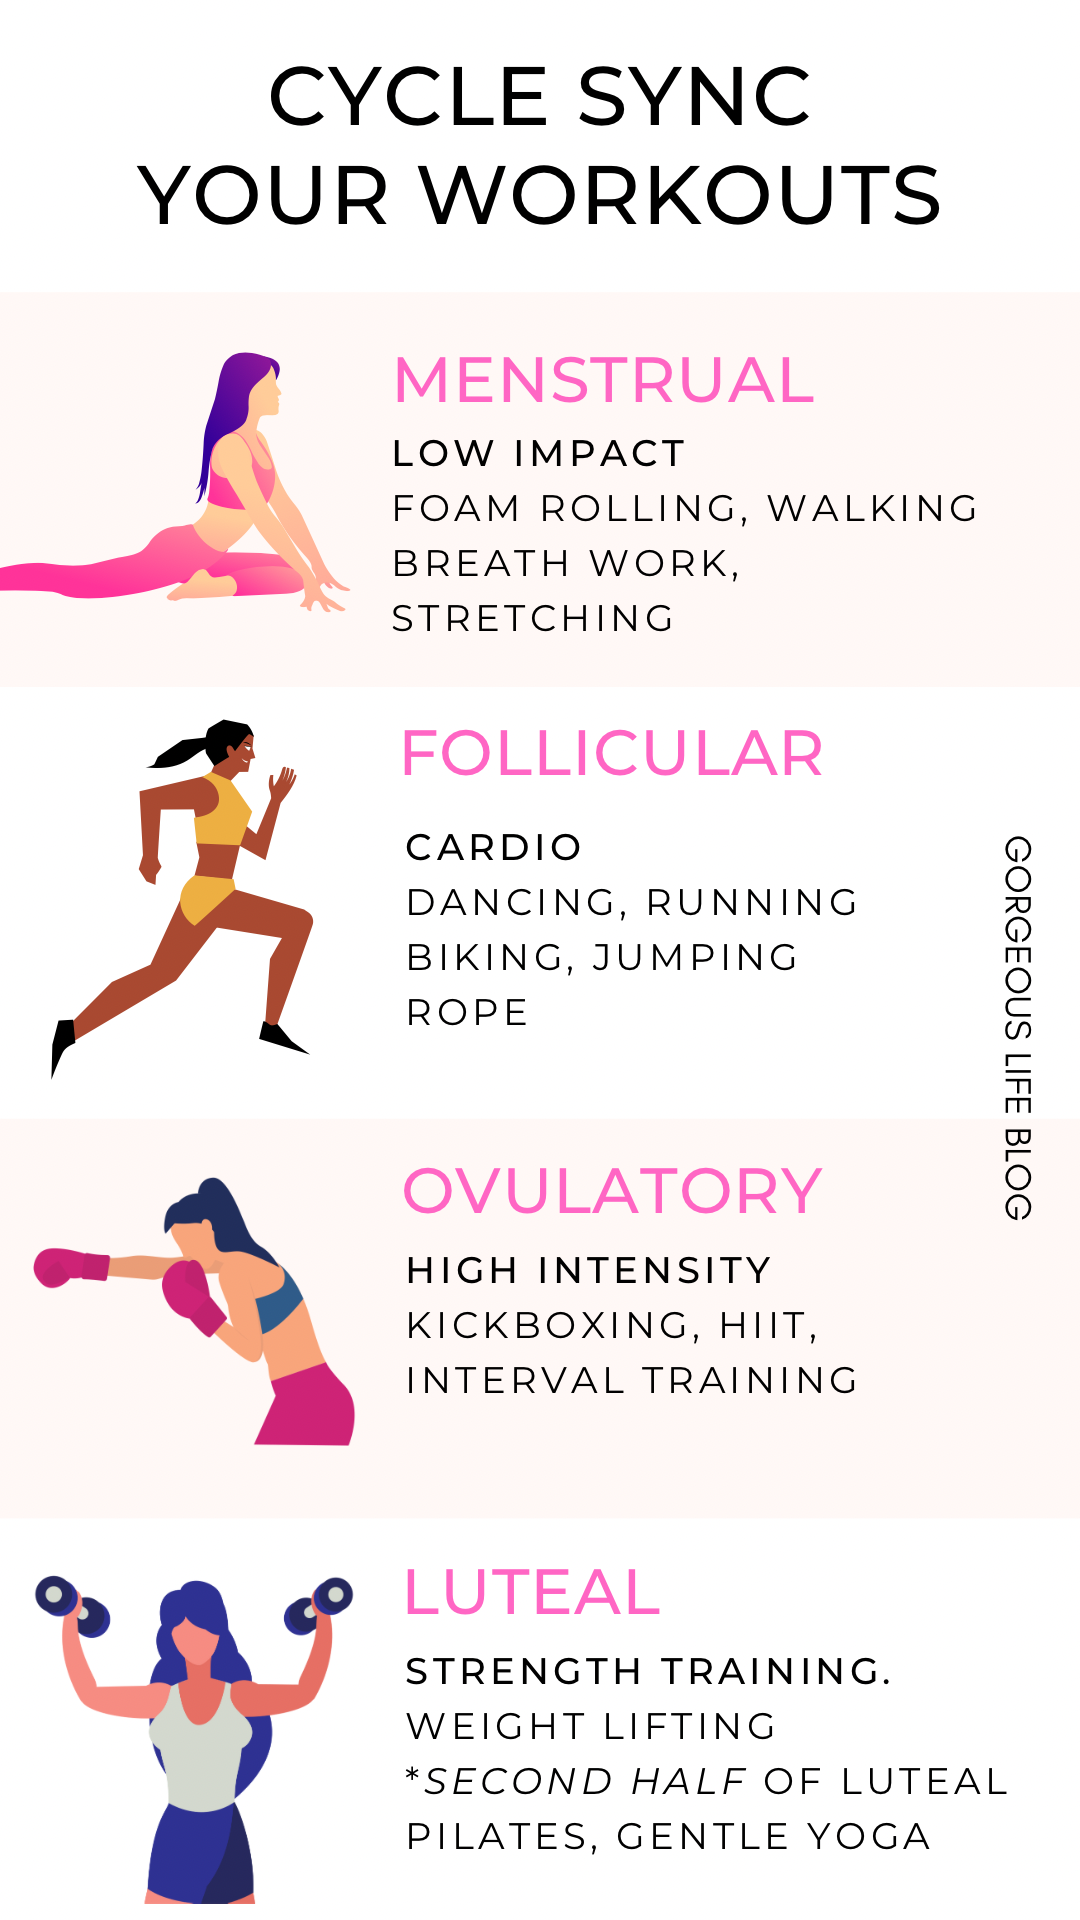 Cycle Syncing Workouts: How to Exercise for Your Menstrual Cycle